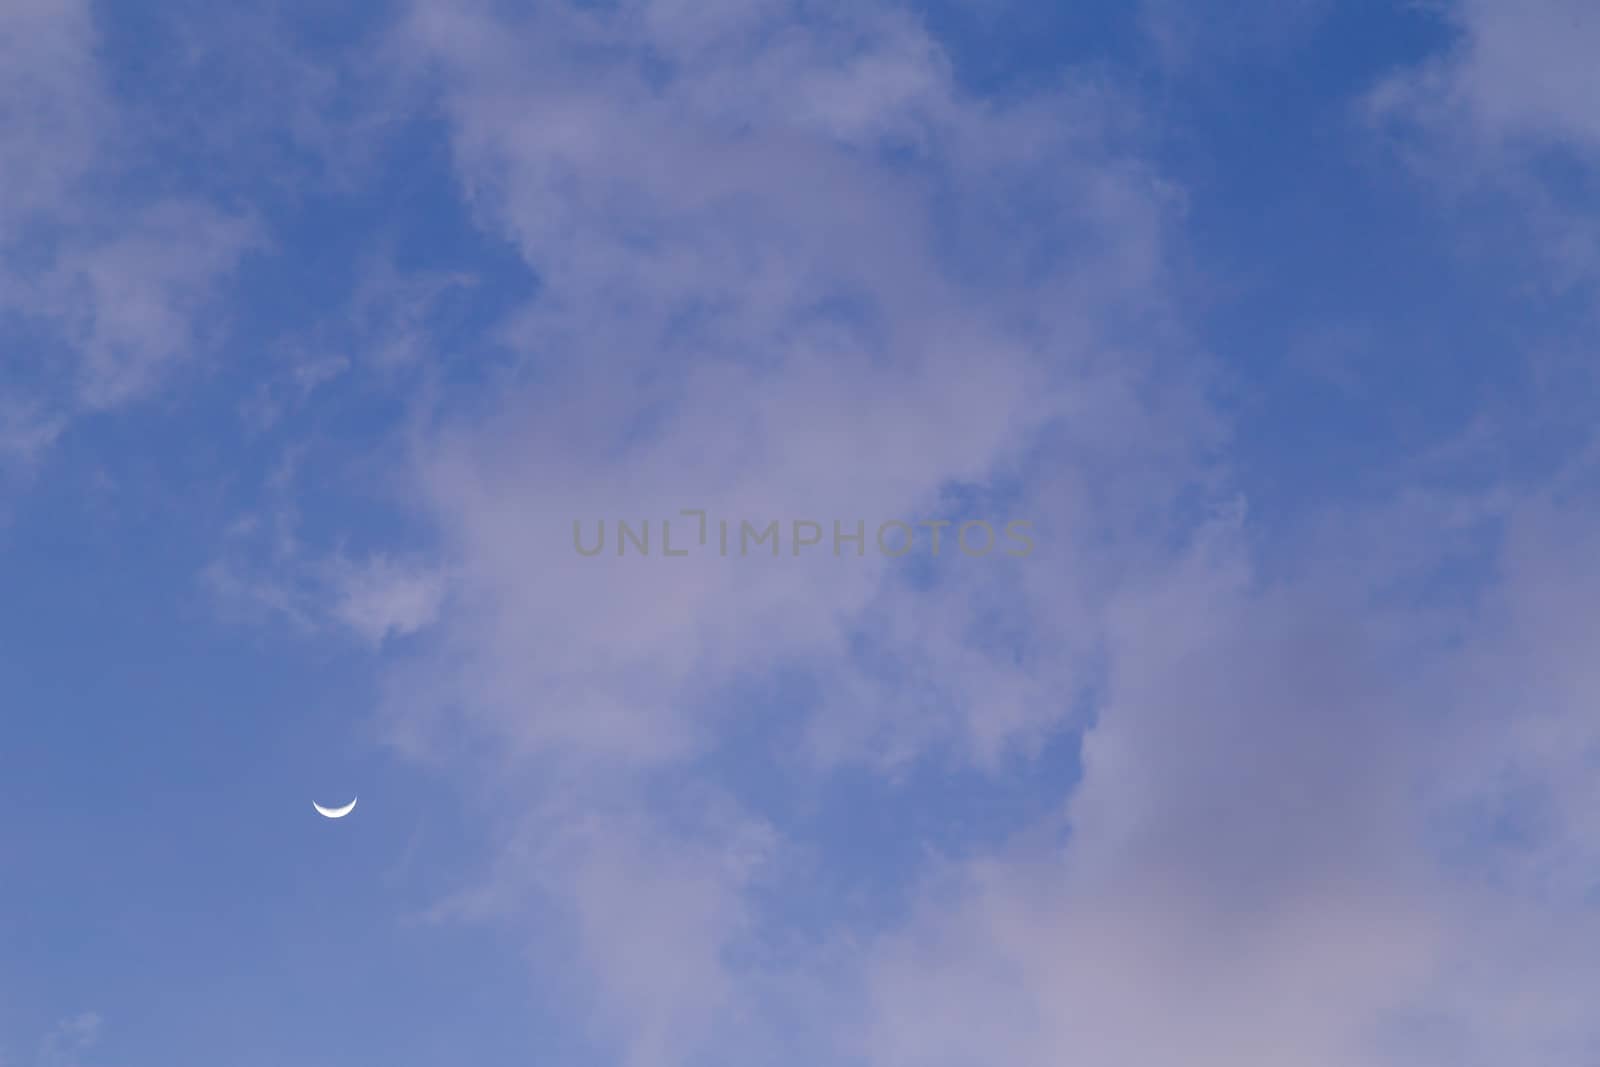 Moon behind the clouds during the day on a bright blue sky.